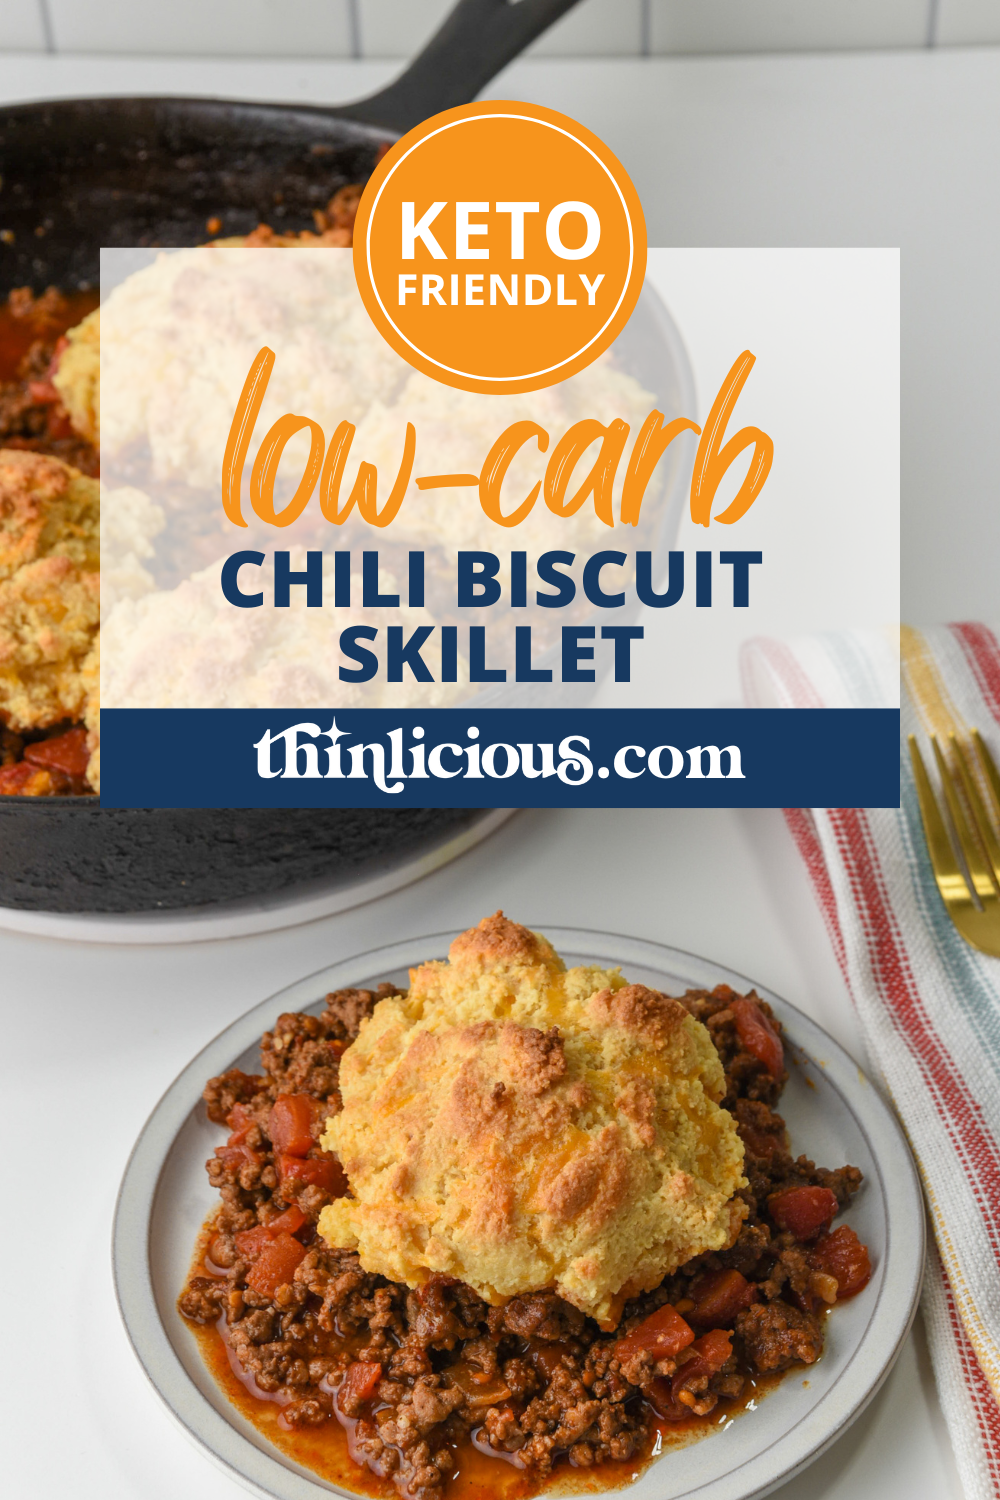 The Tastiest Low-Carb Upside-Down Chili Pie - Thinlicious